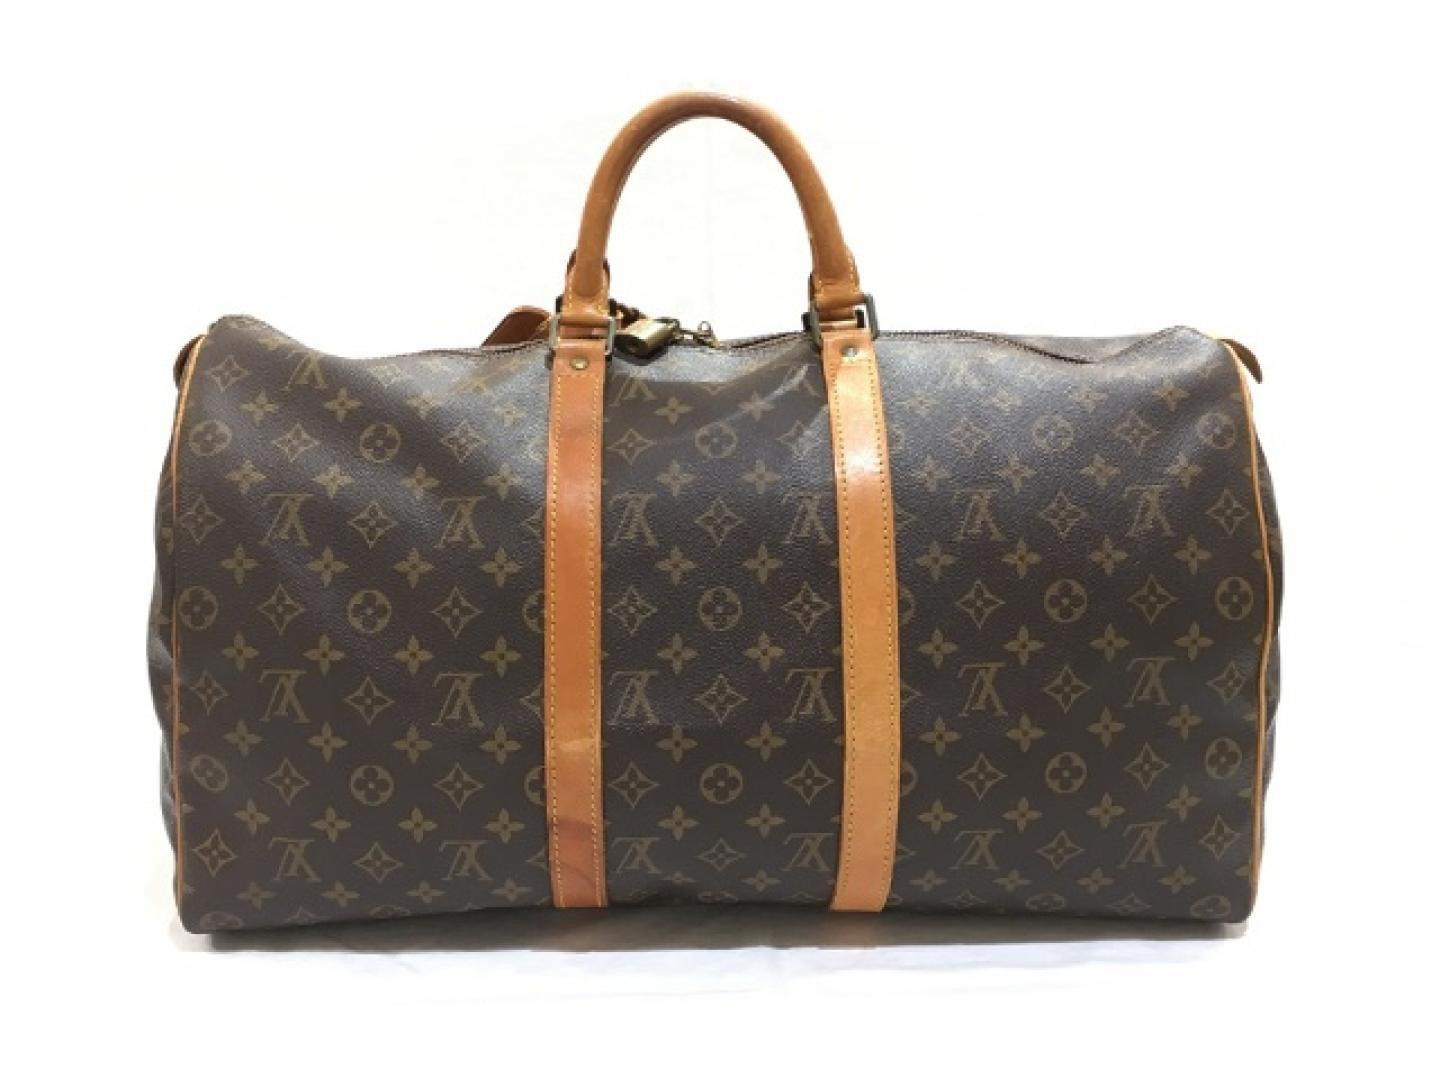 Lyst - Louis Vuitton Authentic Keepall 50 Boston Bag M41426 Monogram Used Vintage in Brown for Men